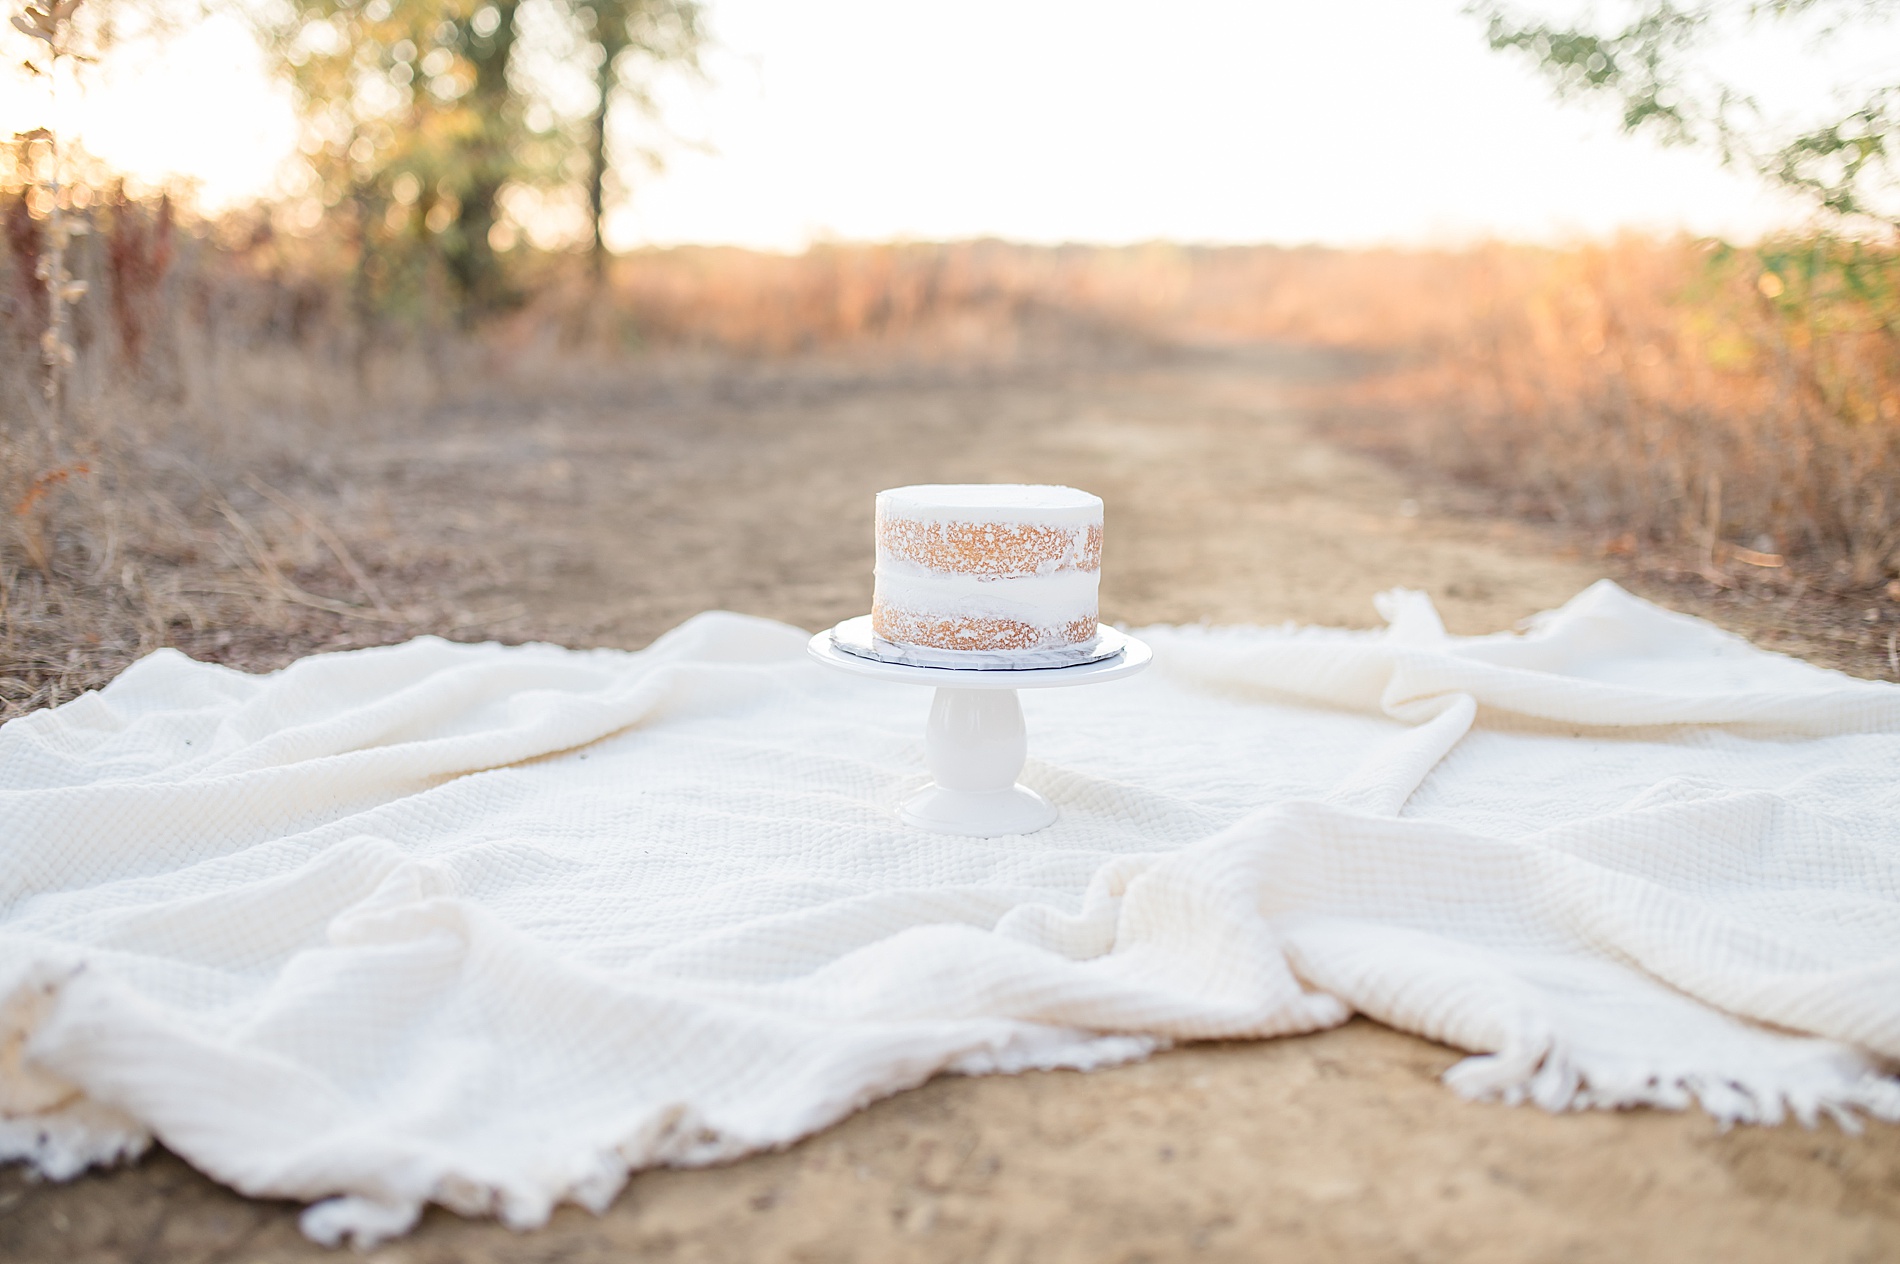 outdoor cake smash session taken by Lindsey Dutton Photography, a Dallas newborn photographer
